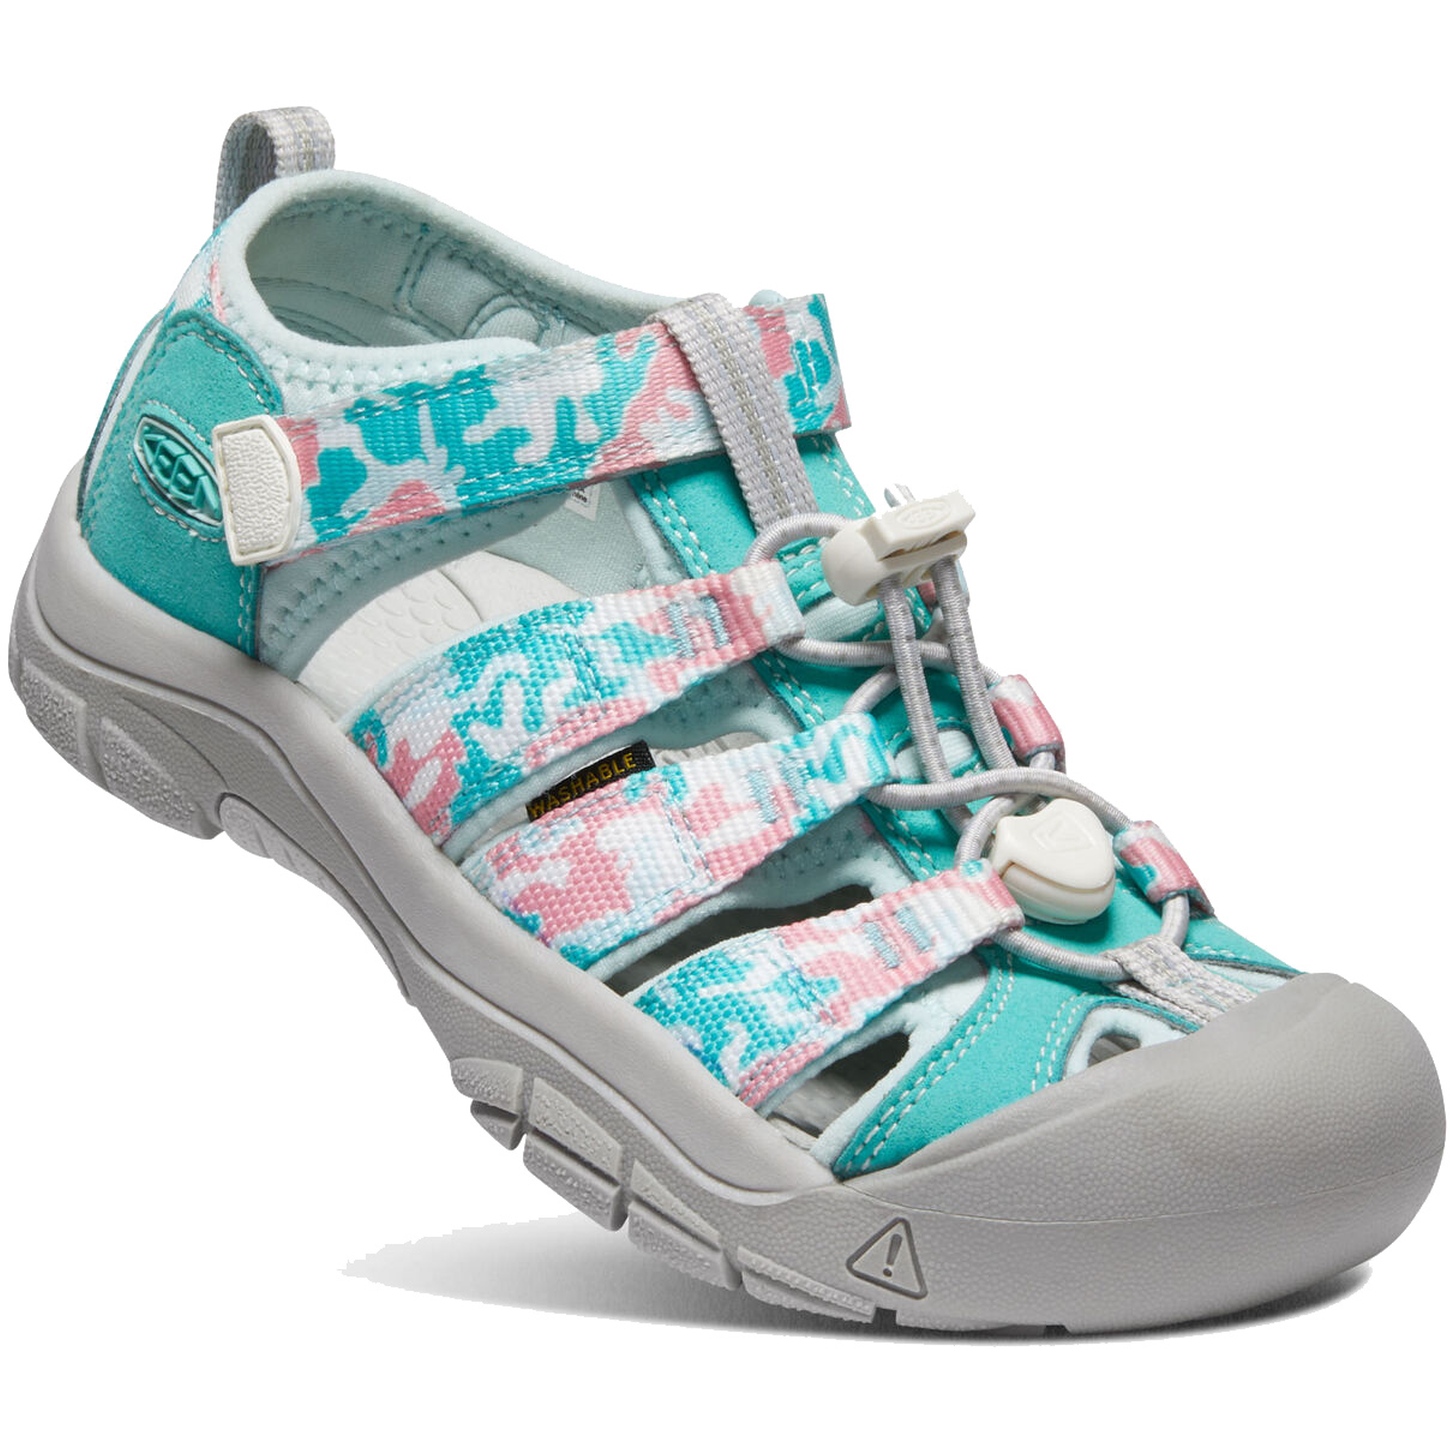 Picture of KEEN Newport H2 Kids Sandals - Camo / Pink Icing (Size 32-39)